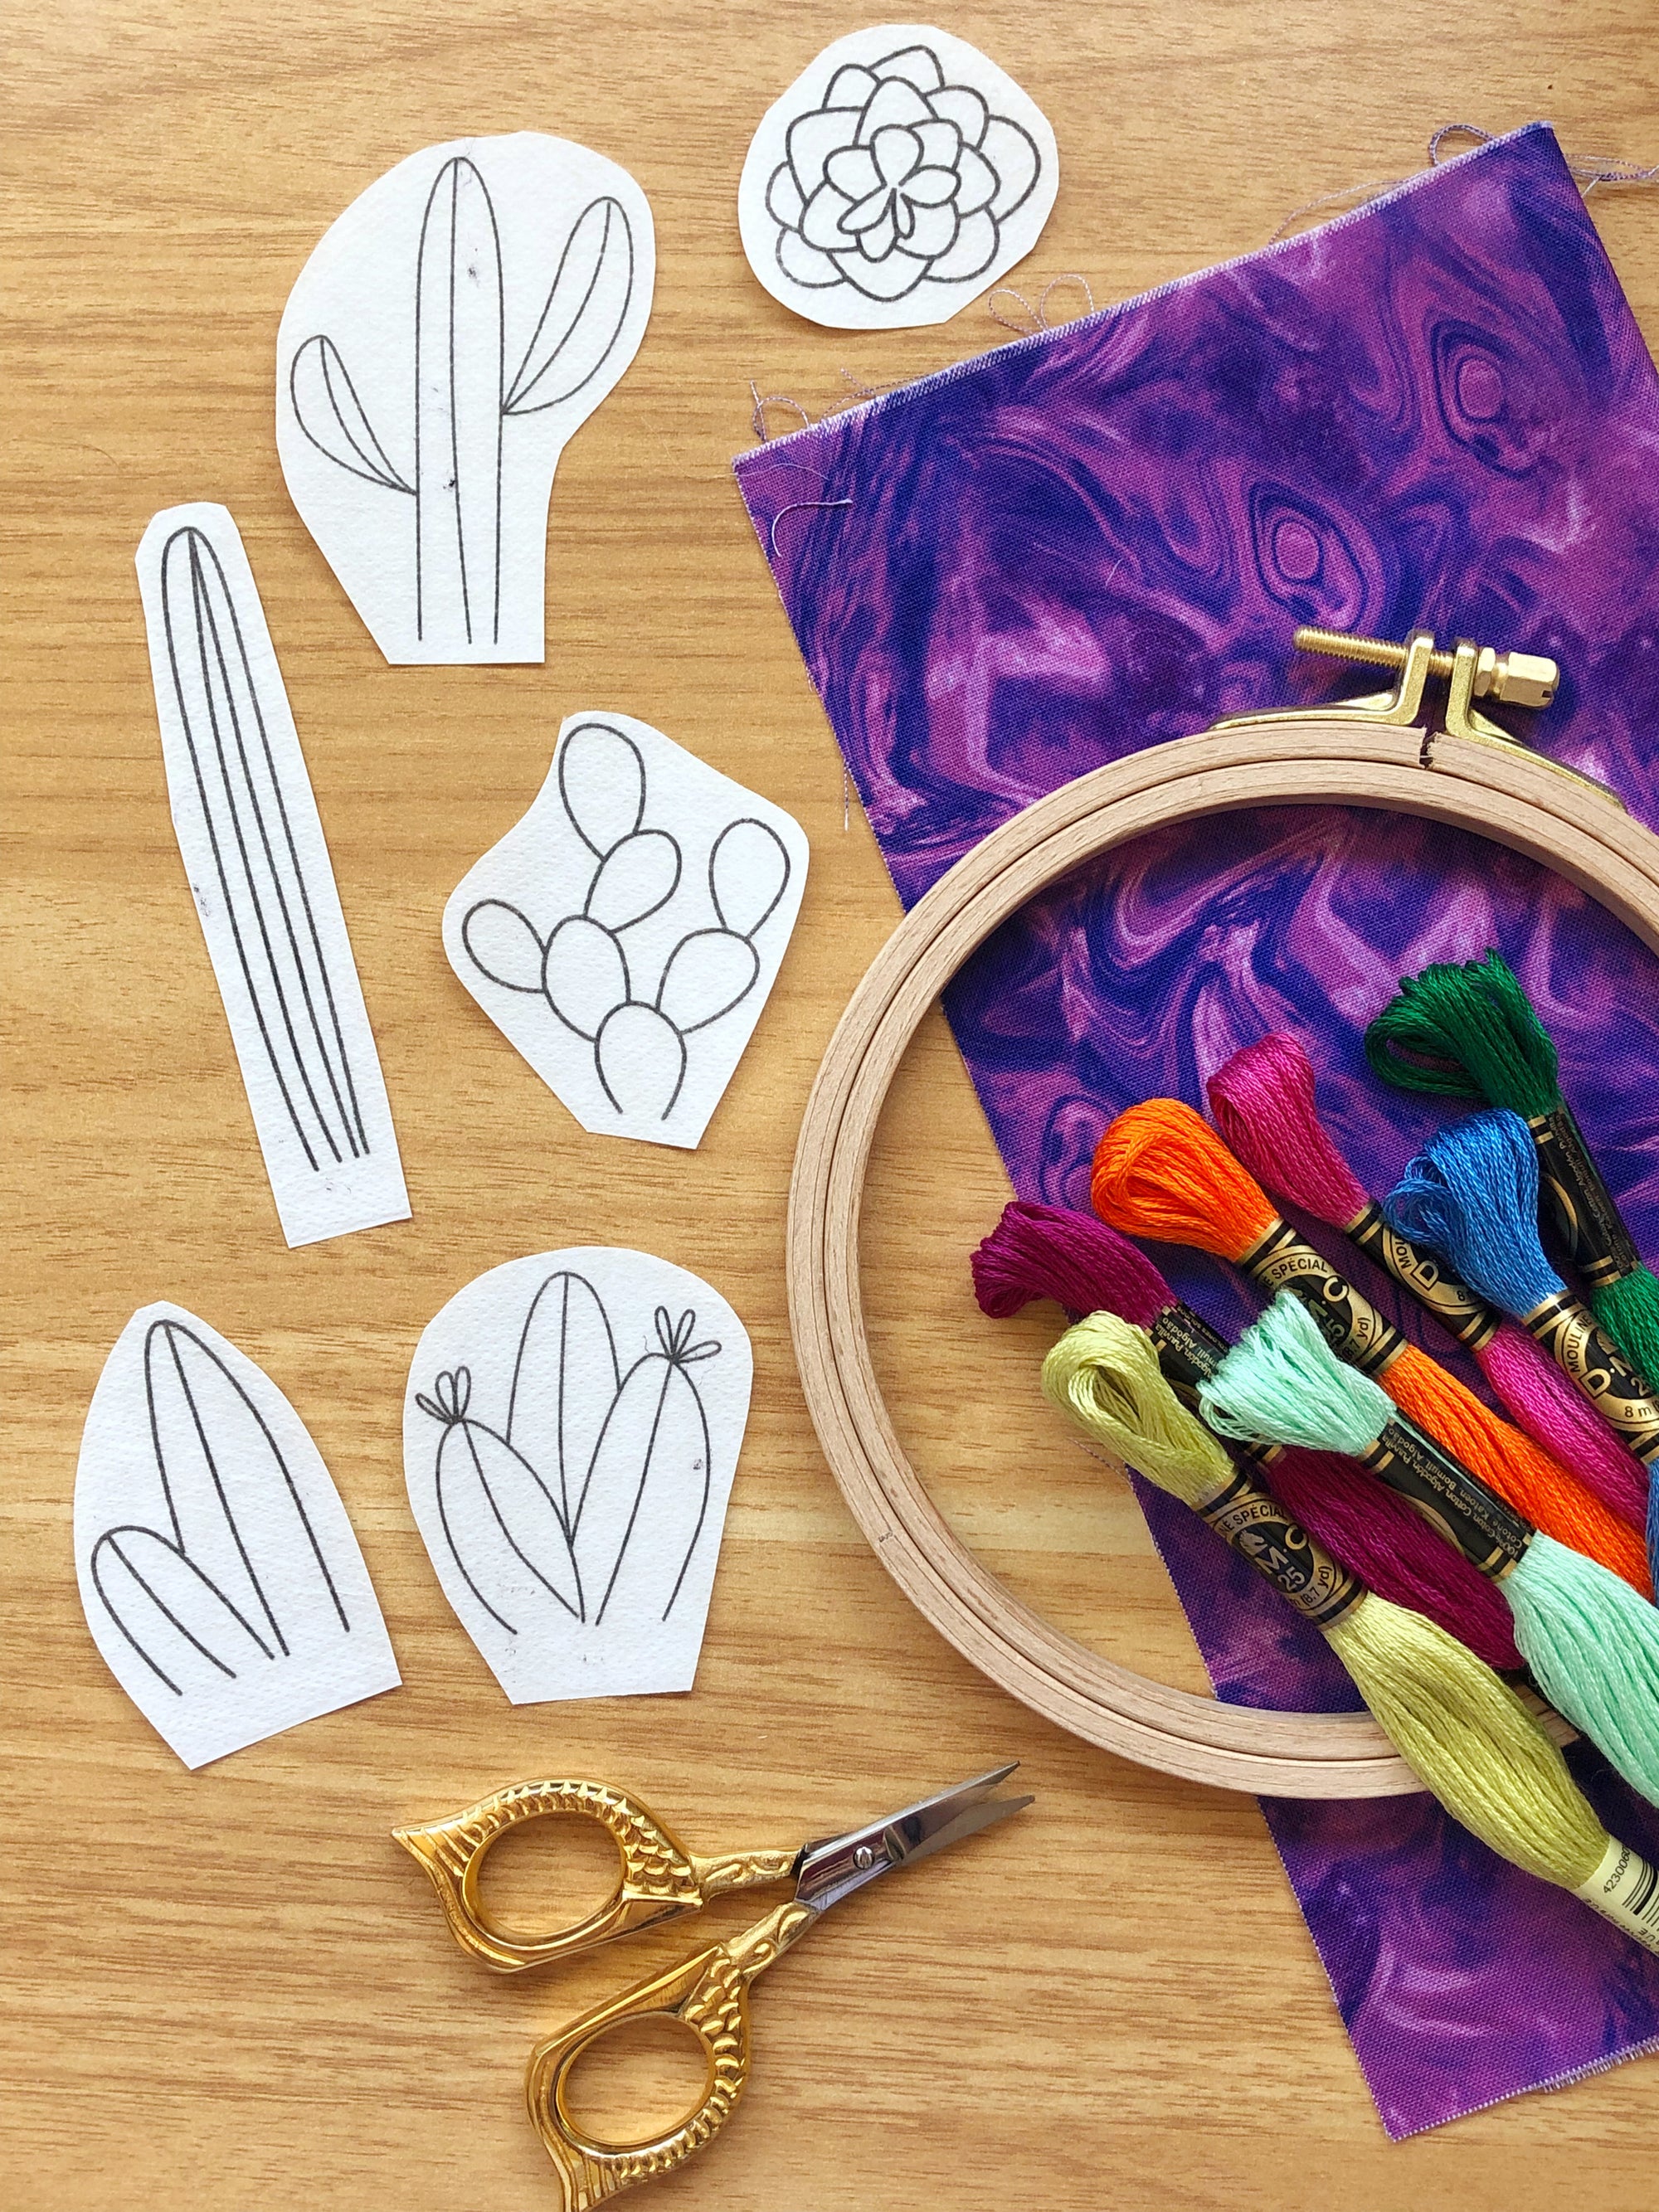 EMBROIDERY CLASS: Cactus Embroidery Basics